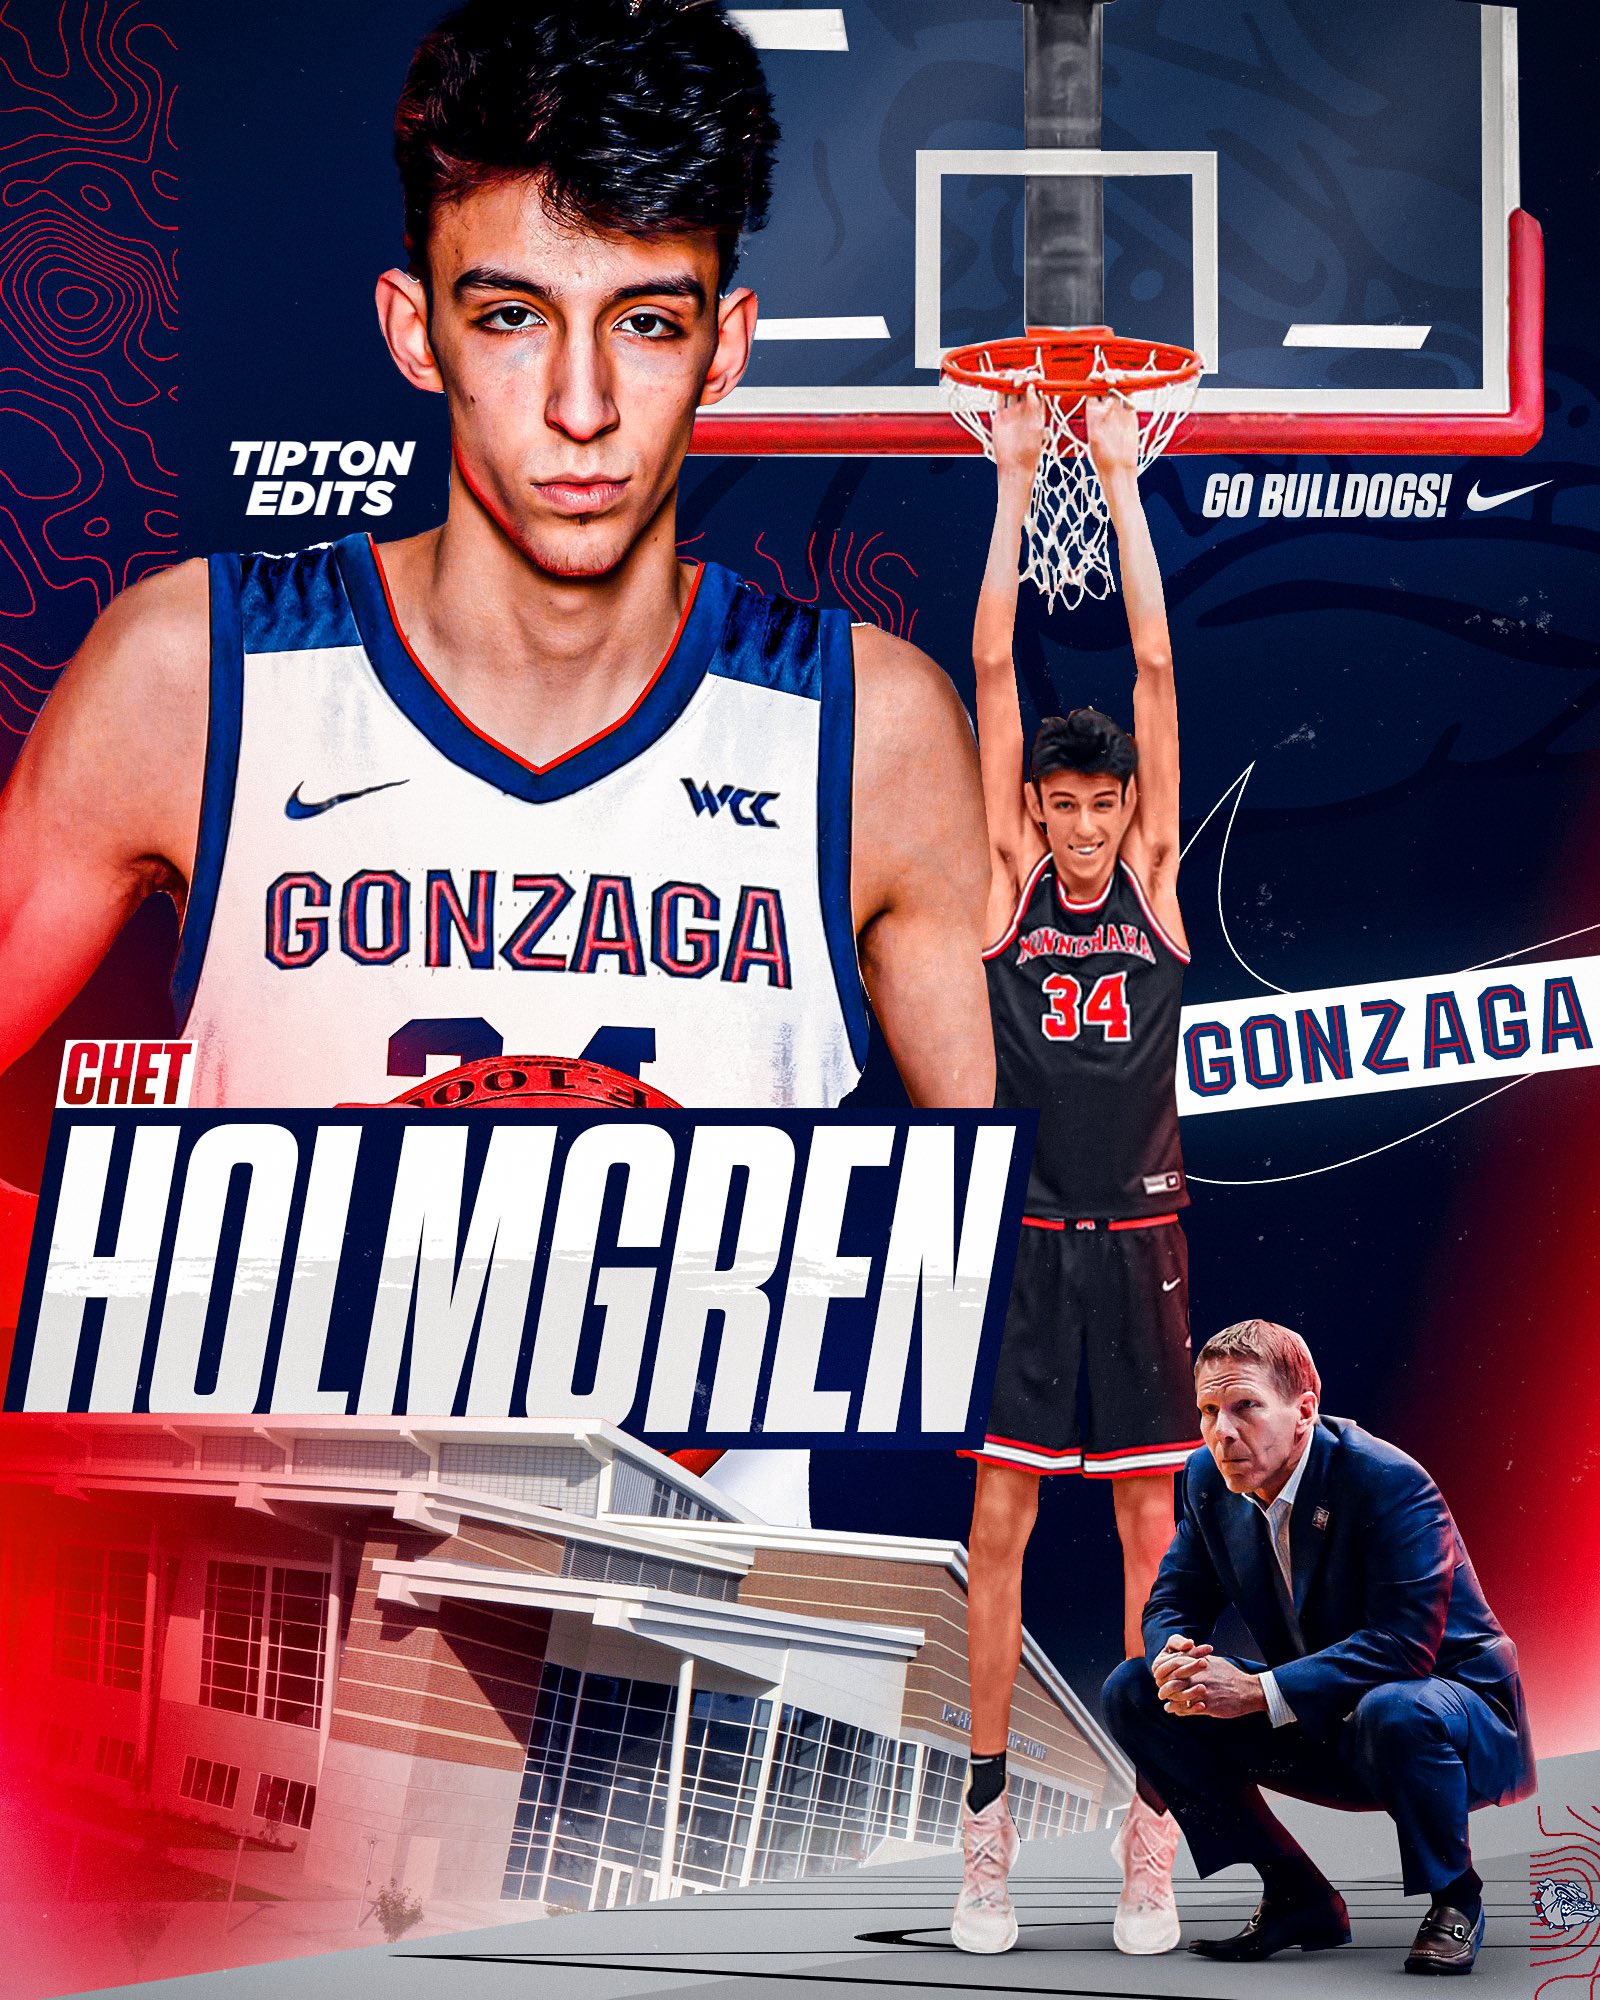 Joe Tipton⭐️ Chet Holmgren has committed to Gonzaga, becoming the highest ranked recruit to ever commit to the program